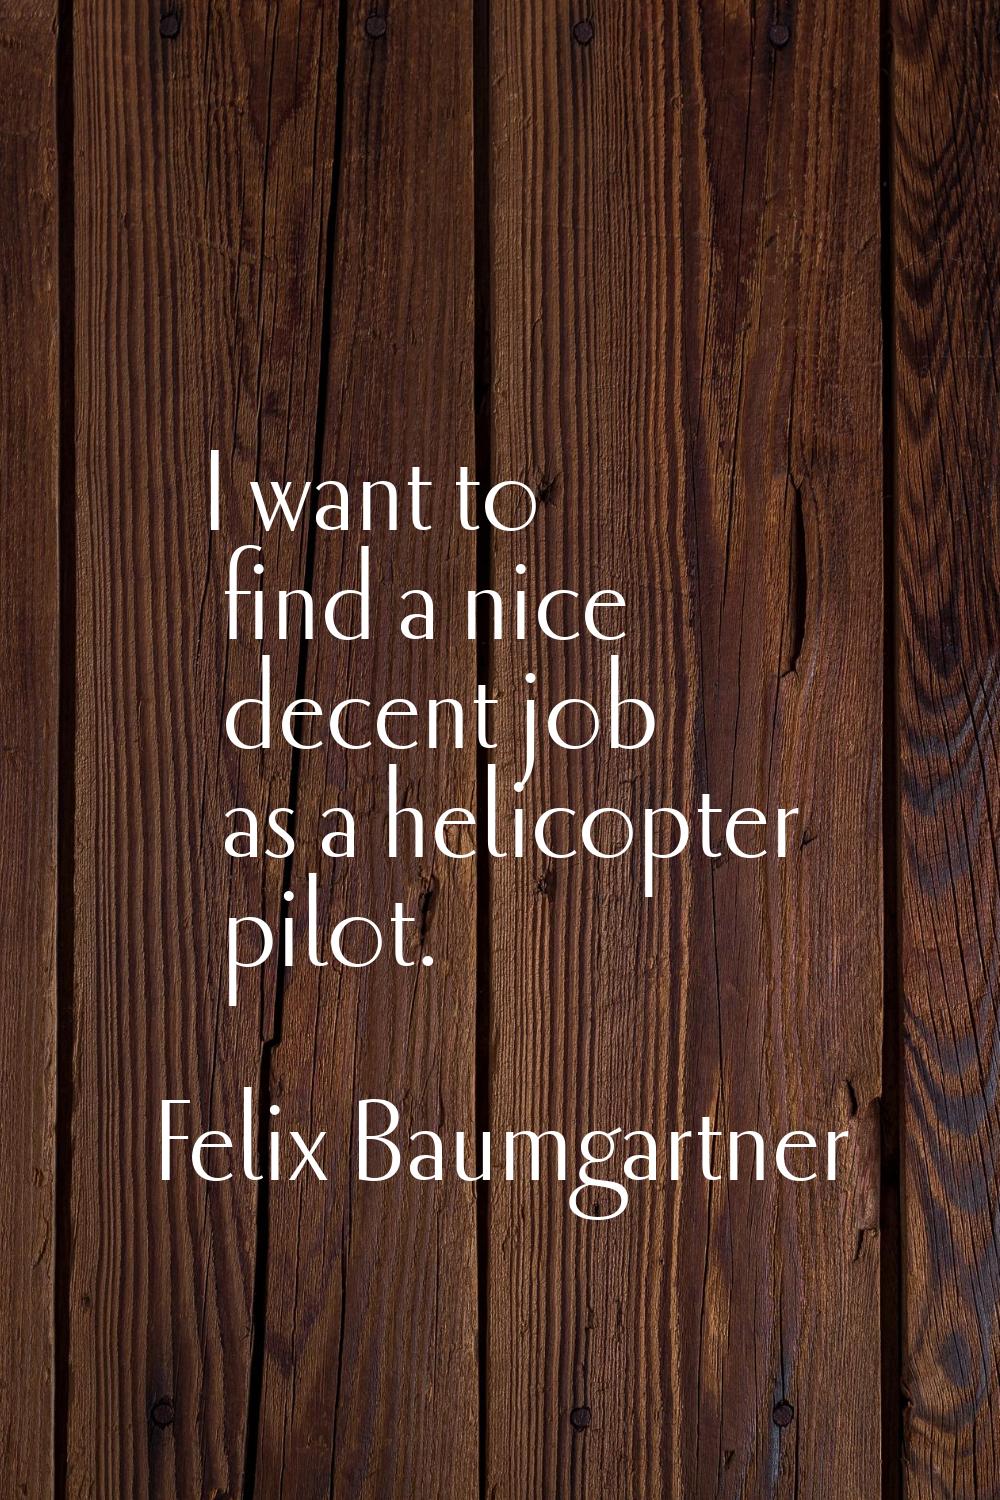 I want to find a nice decent job as a helicopter pilot.